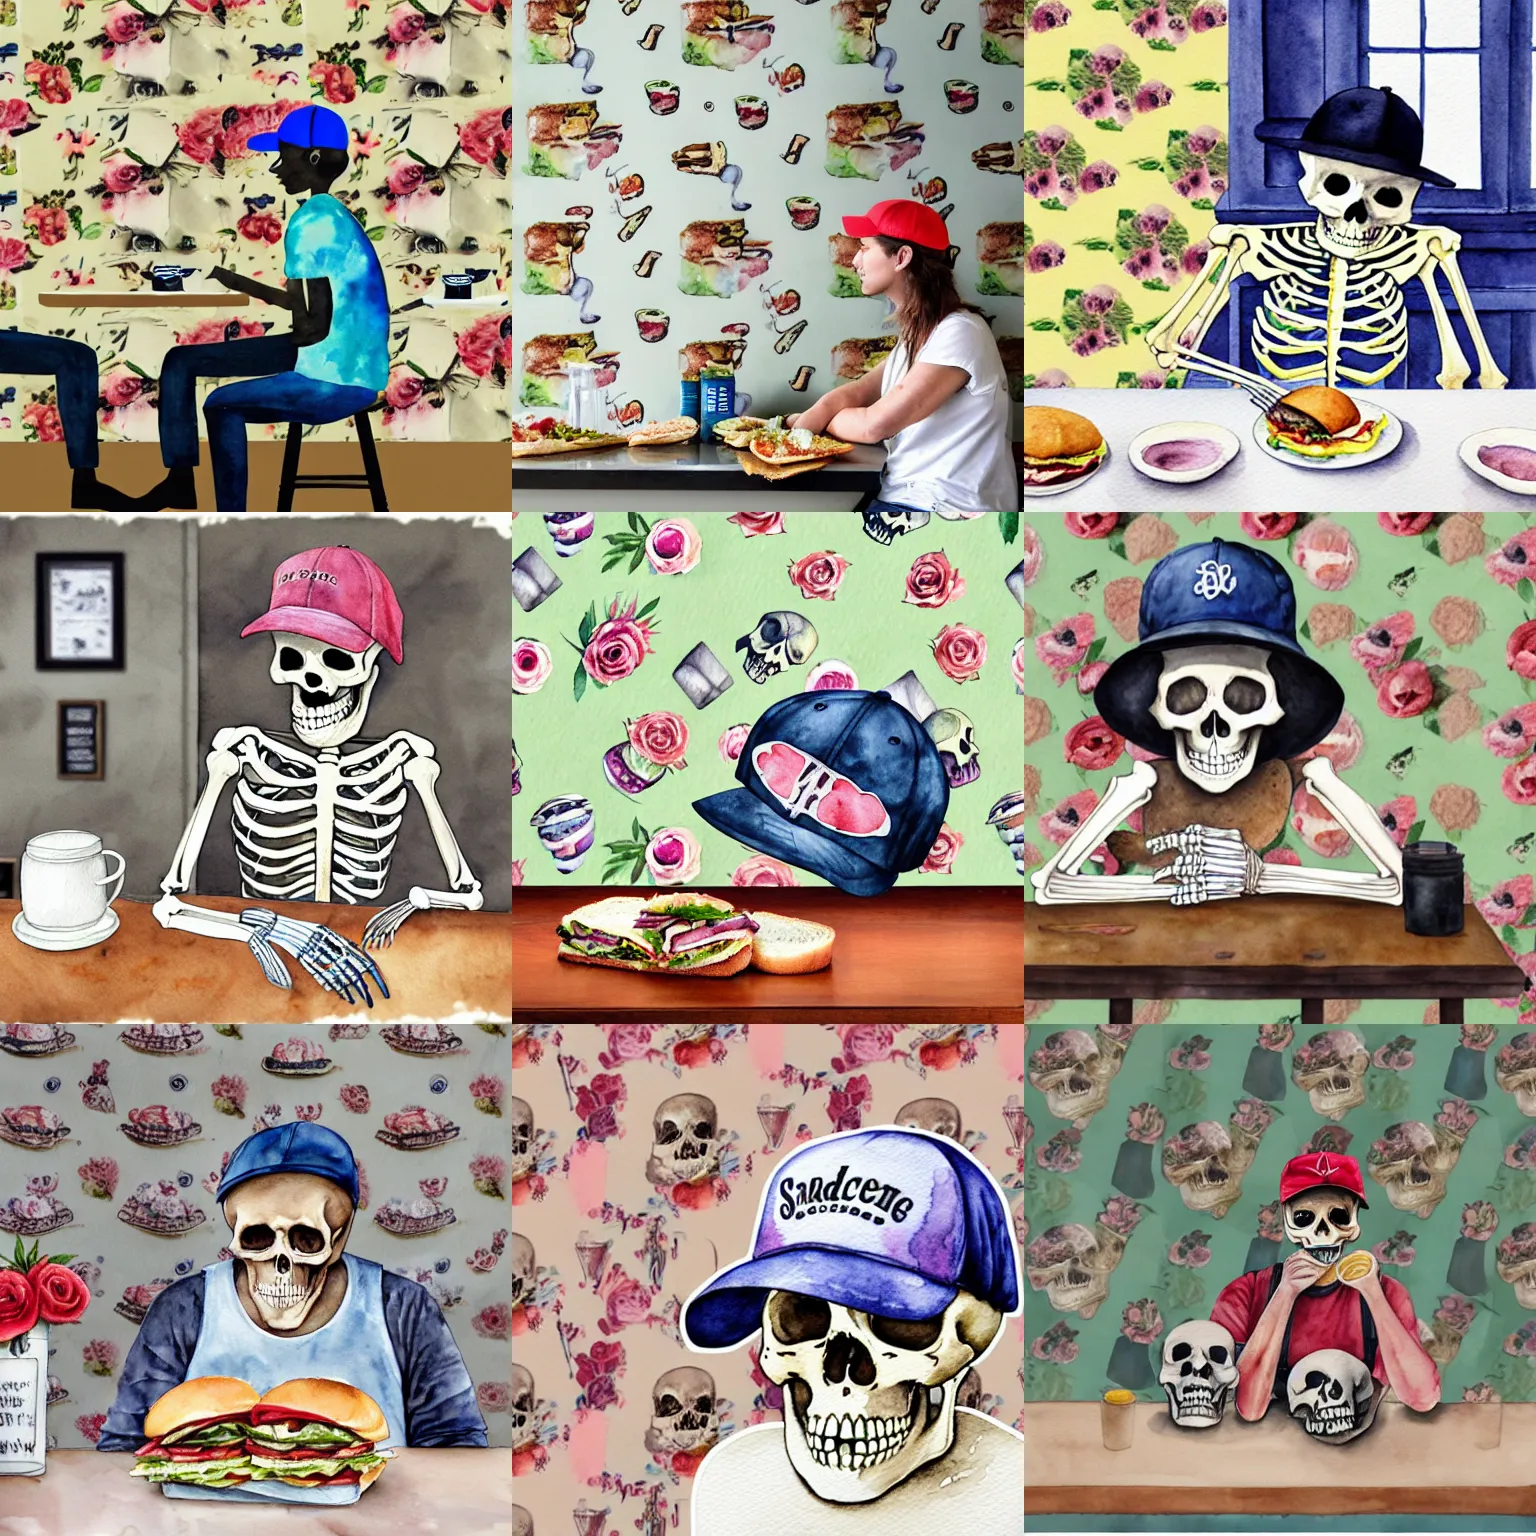 Prompt: watercolor at an eye level view of skeleton, from left hand side, wearing a baseball cap backwards, sitting at the counter of a cafe, holding a sandwiched biting into a sandwiche. in the background is floral wallpaper with iridescent and floral theme.